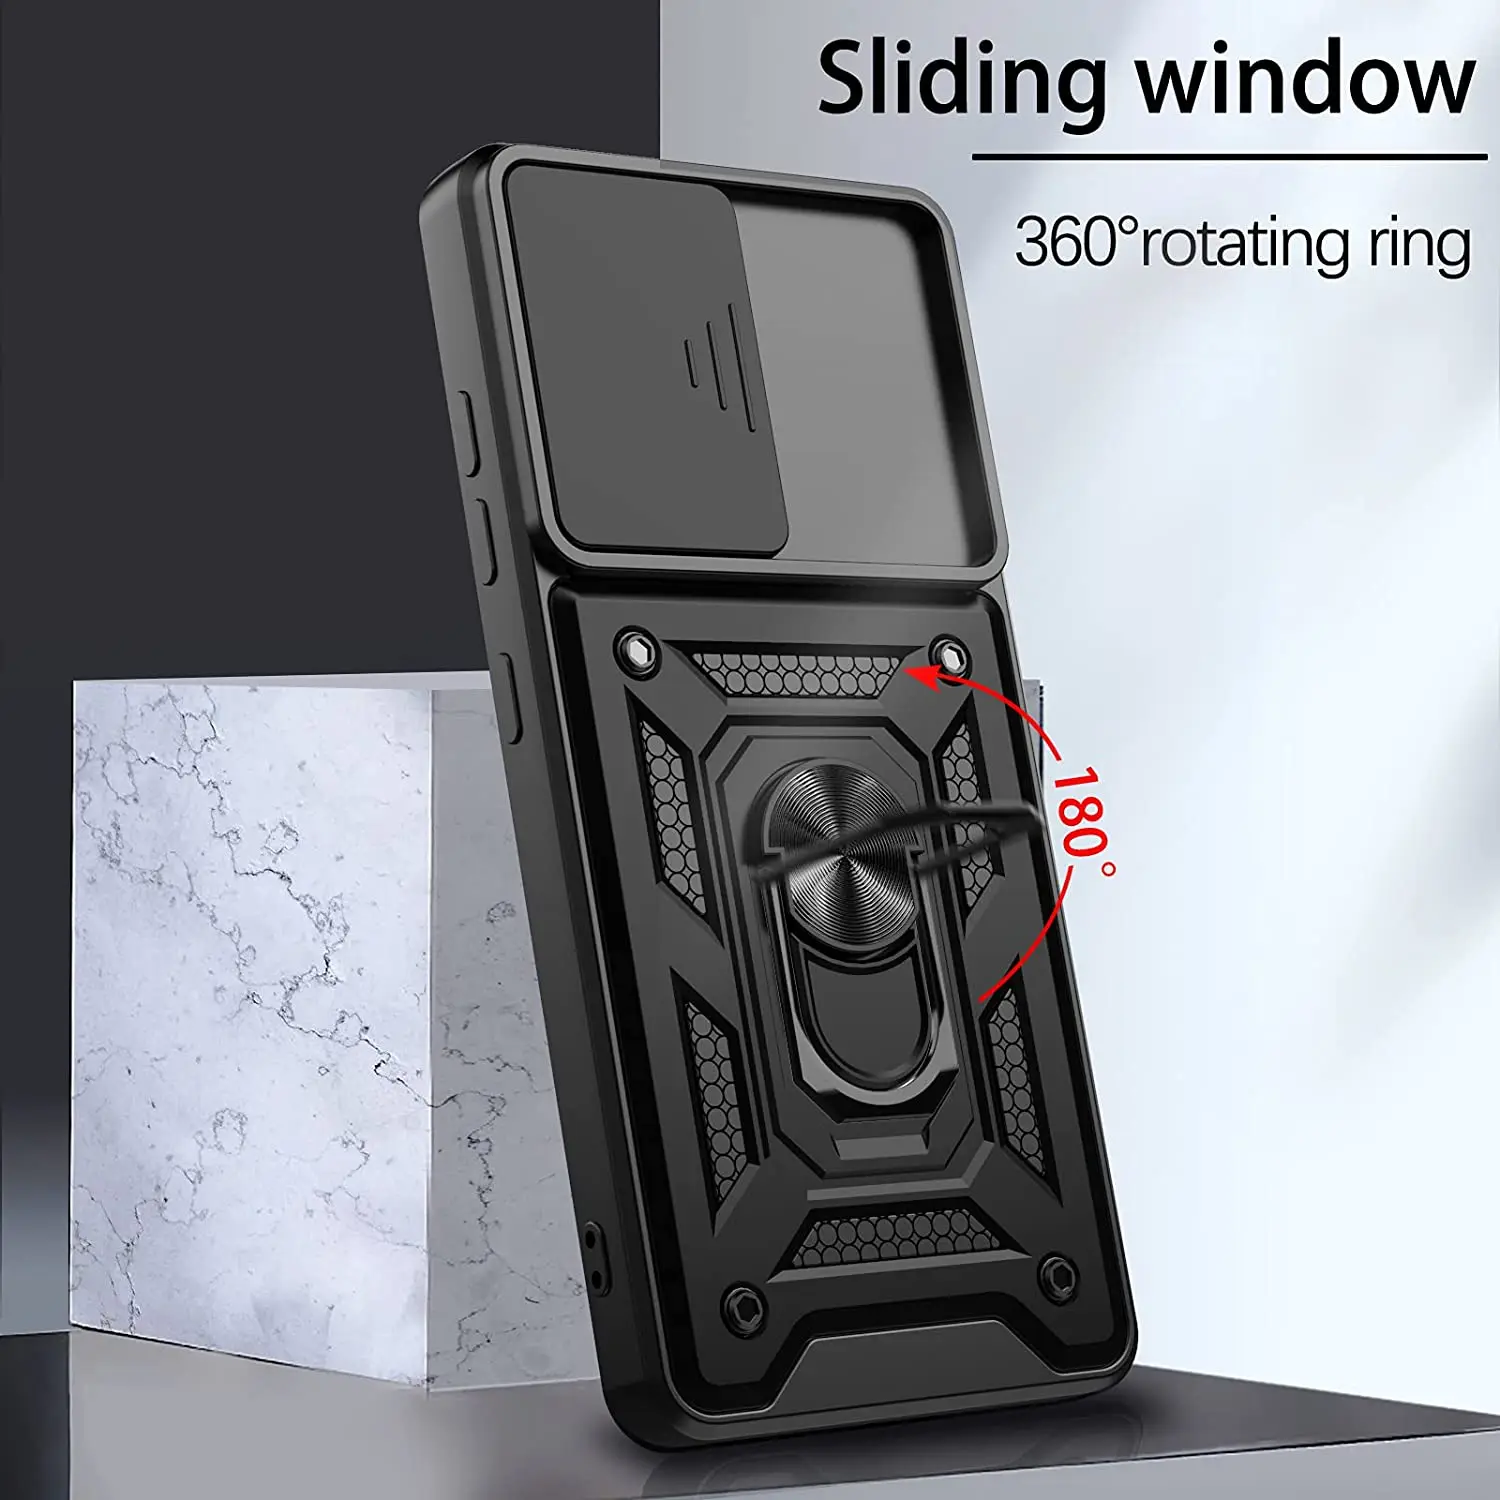 Slide Camera Lens Case for Samsung Galaxy S21 Ultra S21 Plus Note 20 Ultra S20 FE A52 A72 A12 Military Grade Bumpers Armor Cover